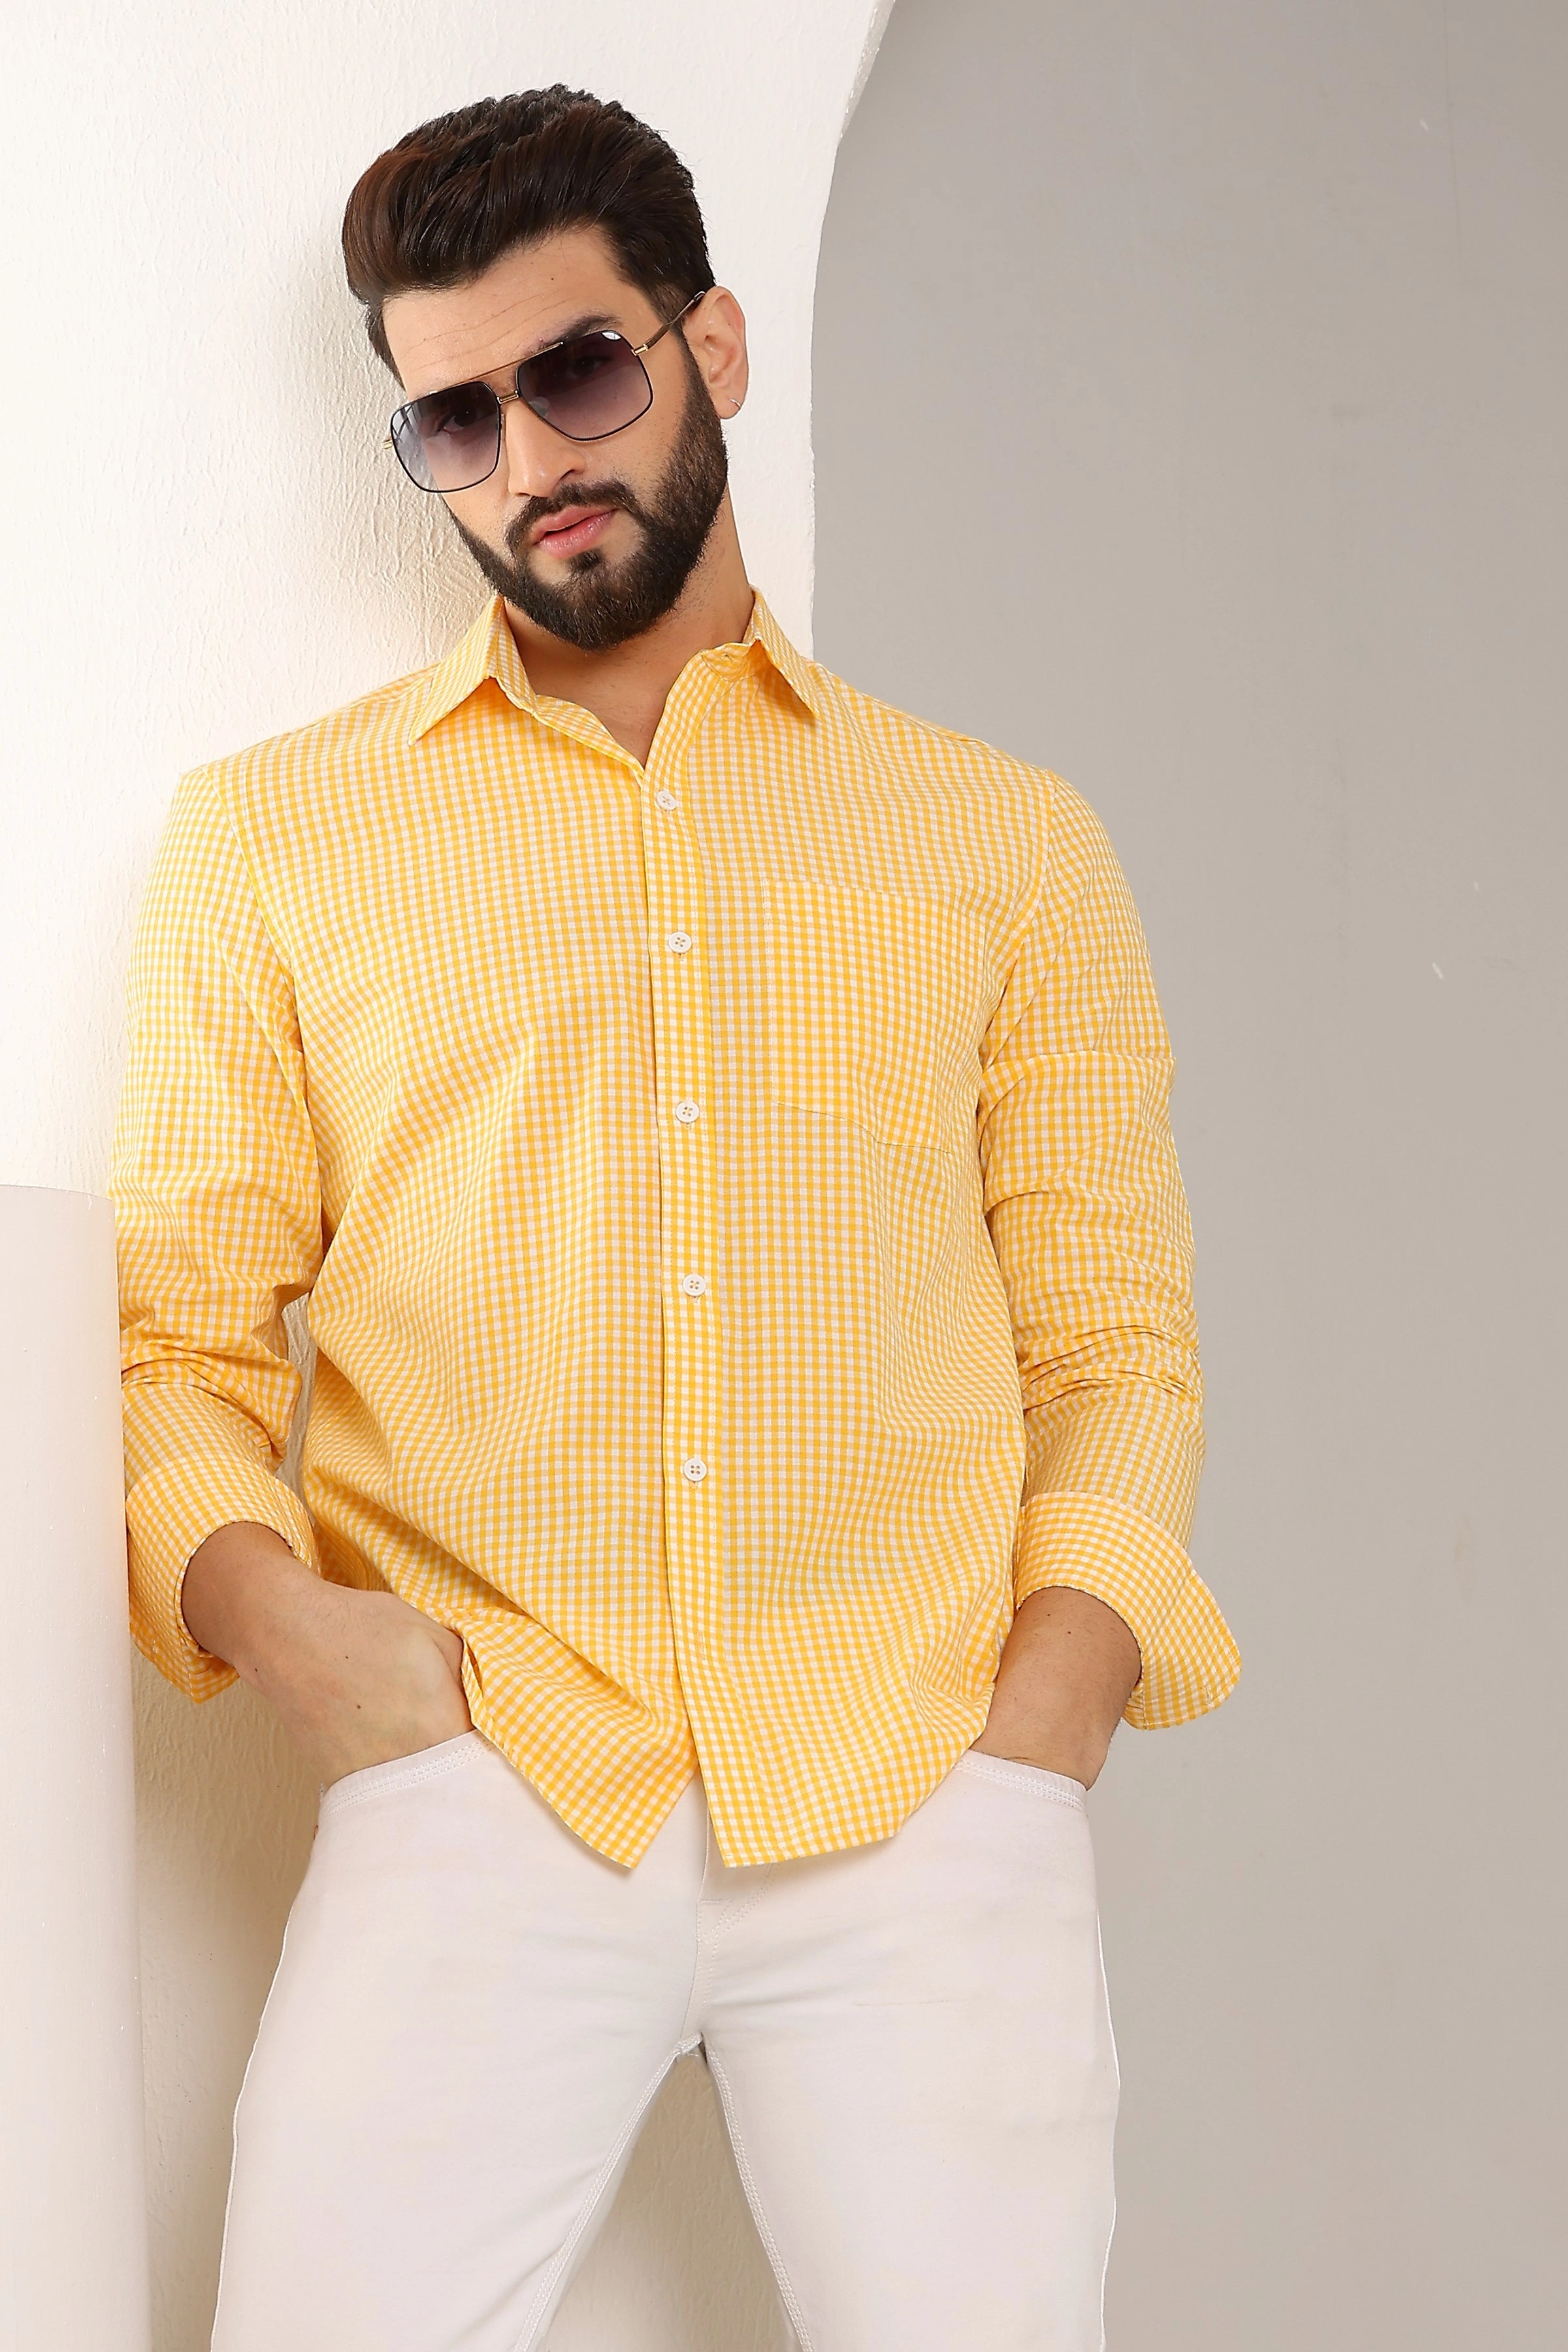 Gingham Sports Cotton Shirts Yellow And White-S-2